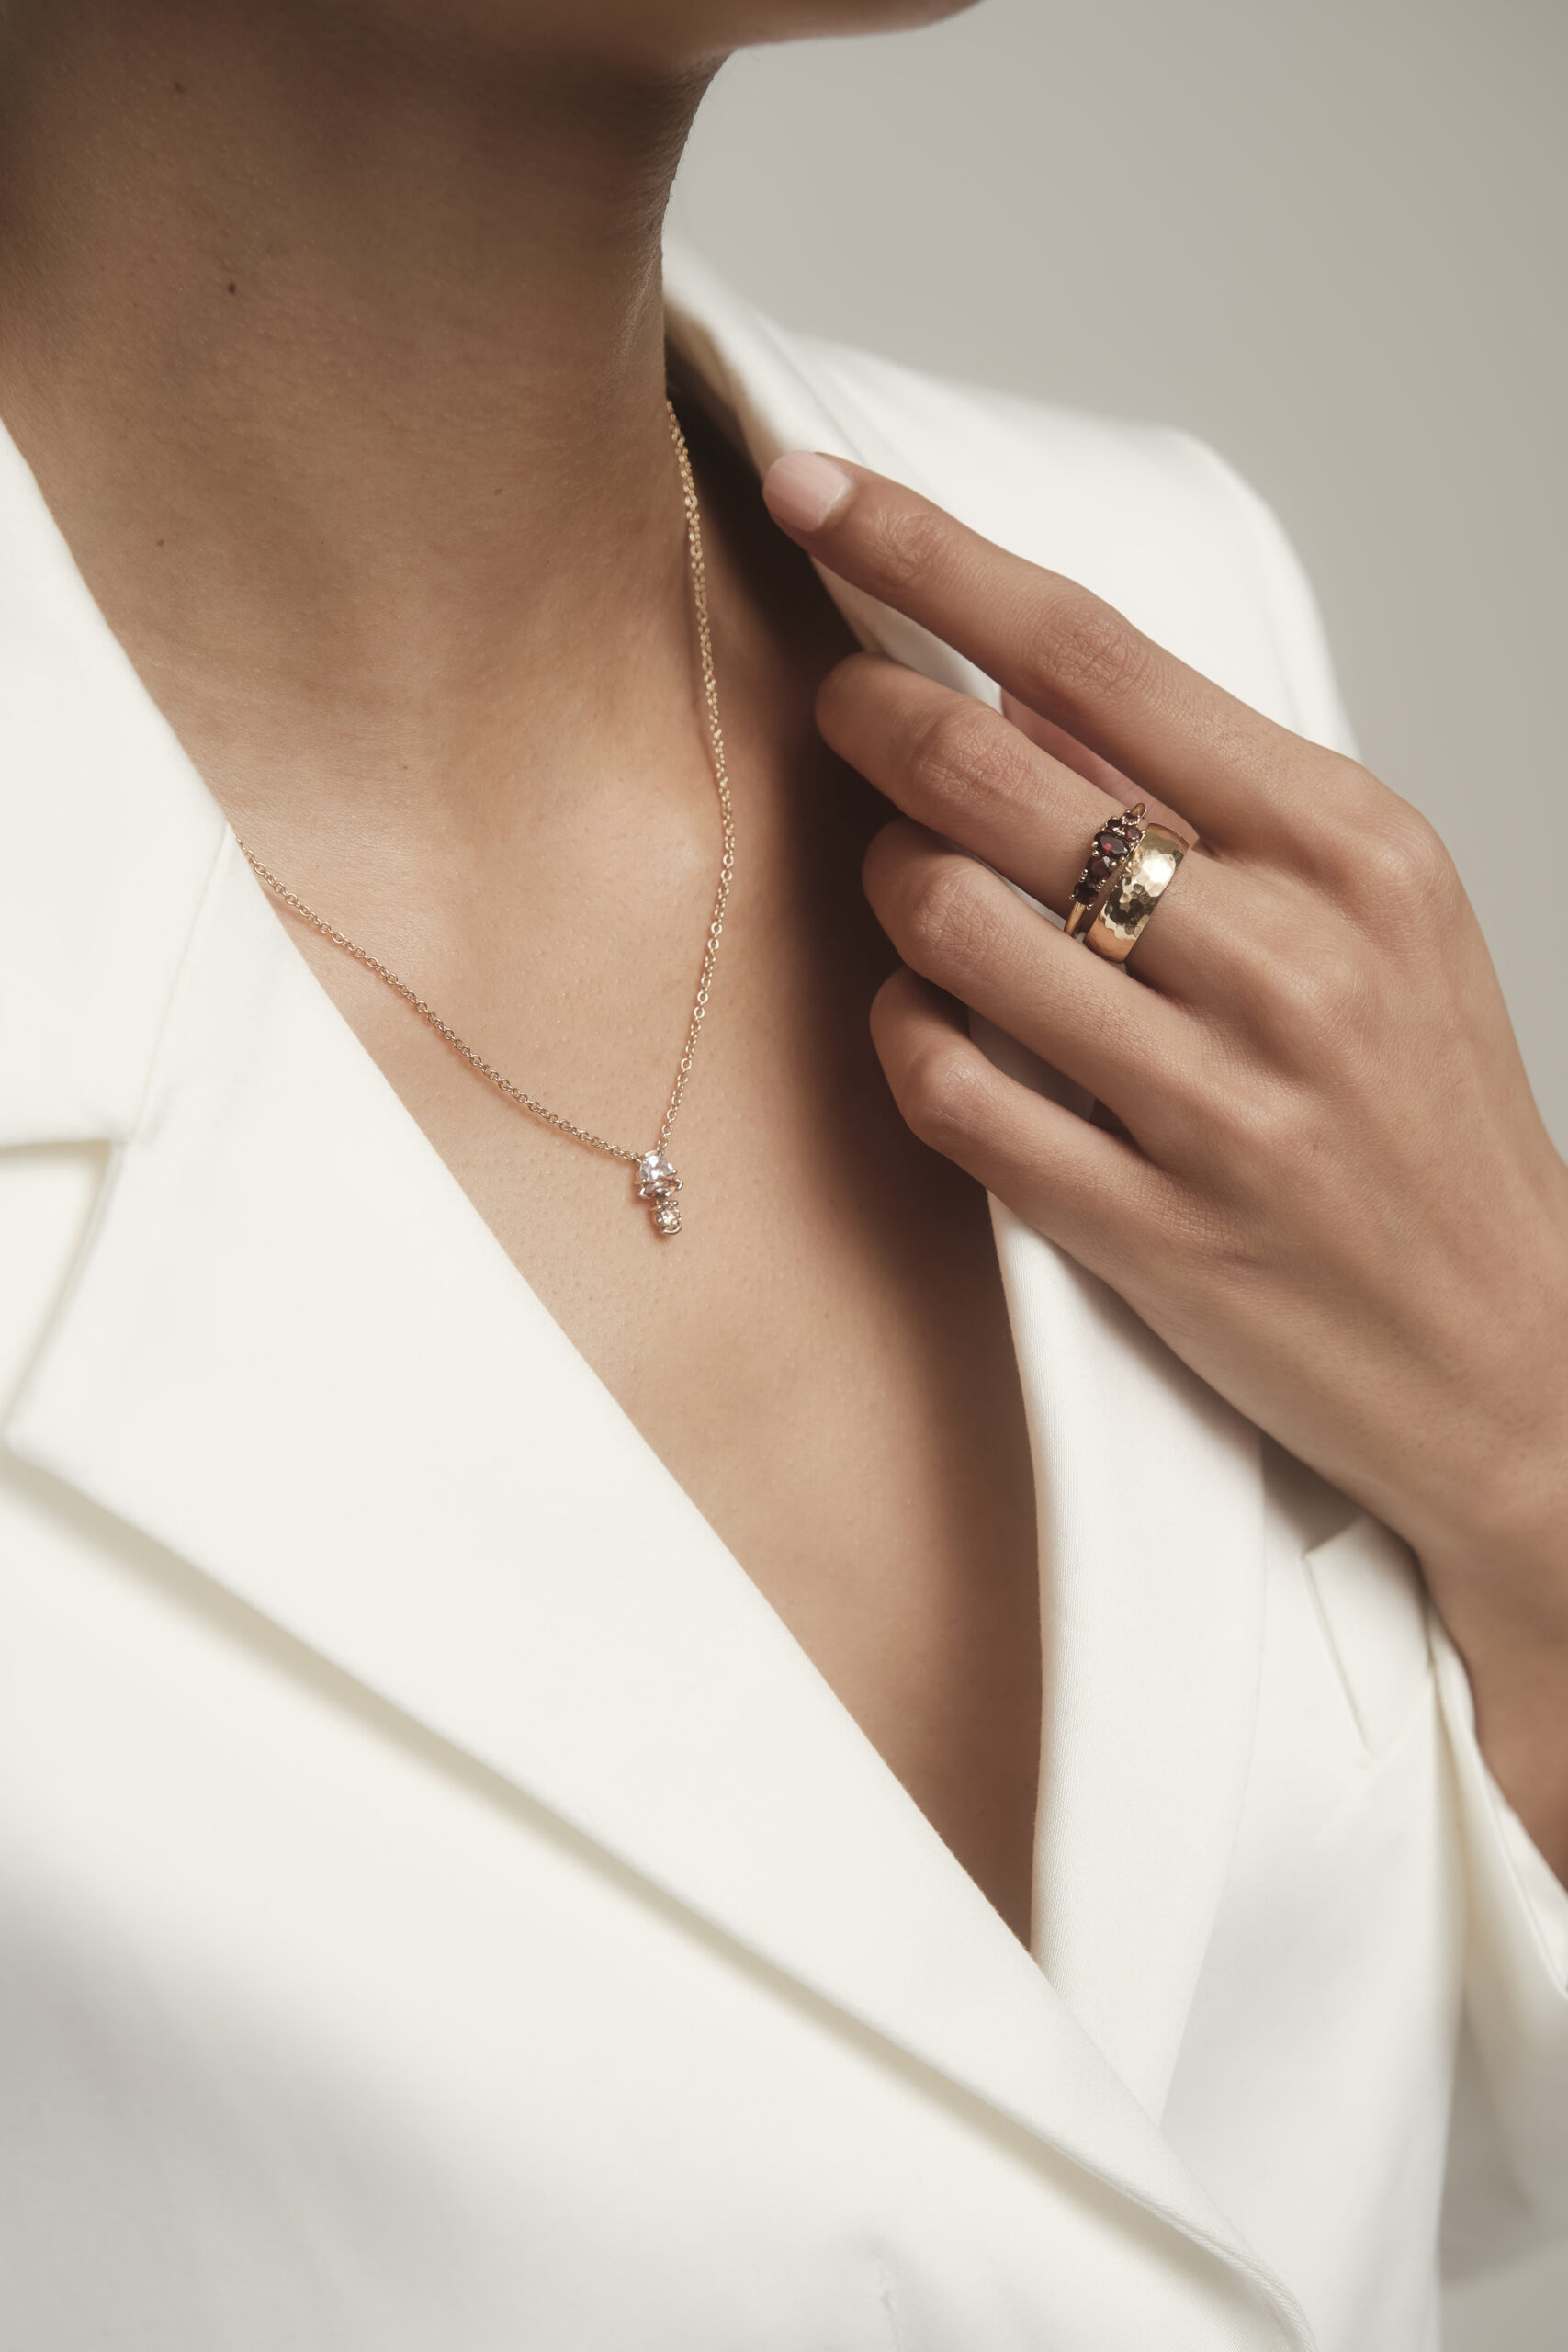 woman gracefully placing hand on blazer collar, showcasing stack of rings on middle finger. She is also wearing a gemstone and diamond pendant necklace.